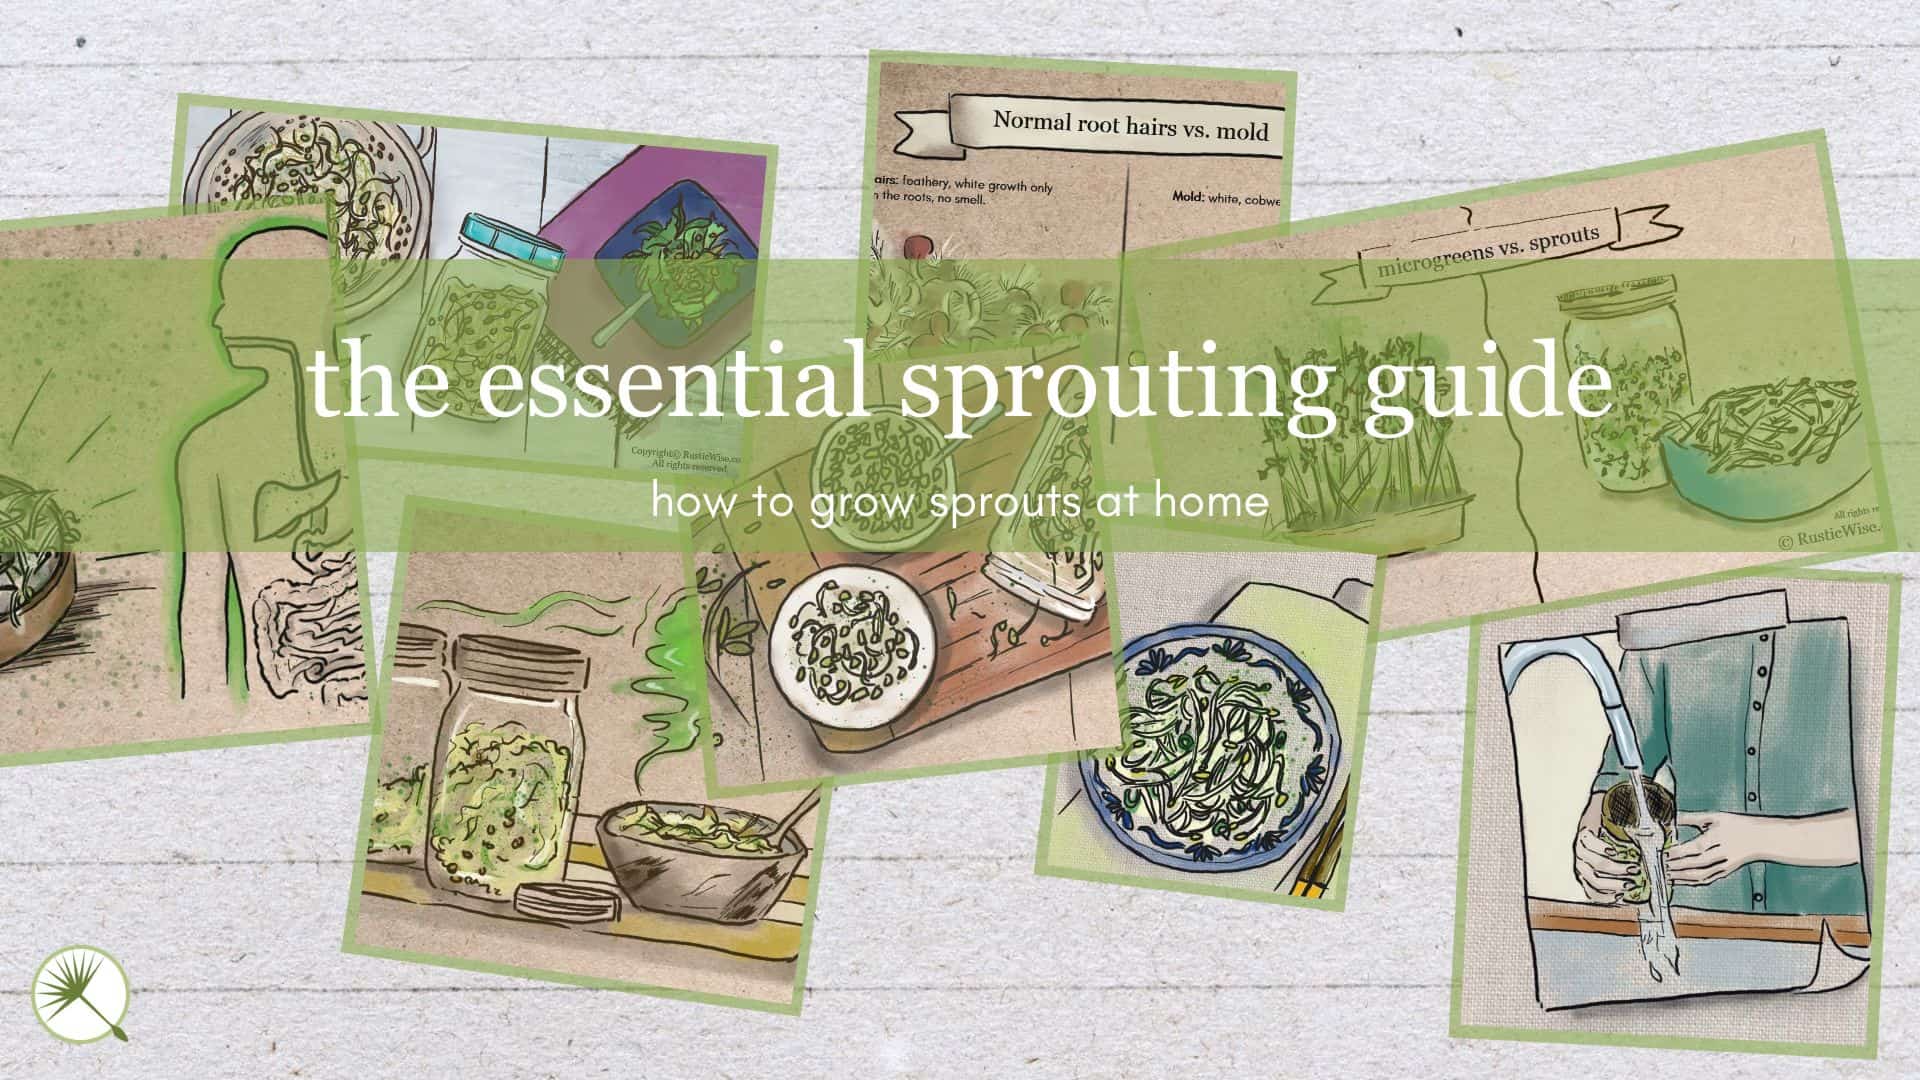 RusticWise.com - Sprouting Guide